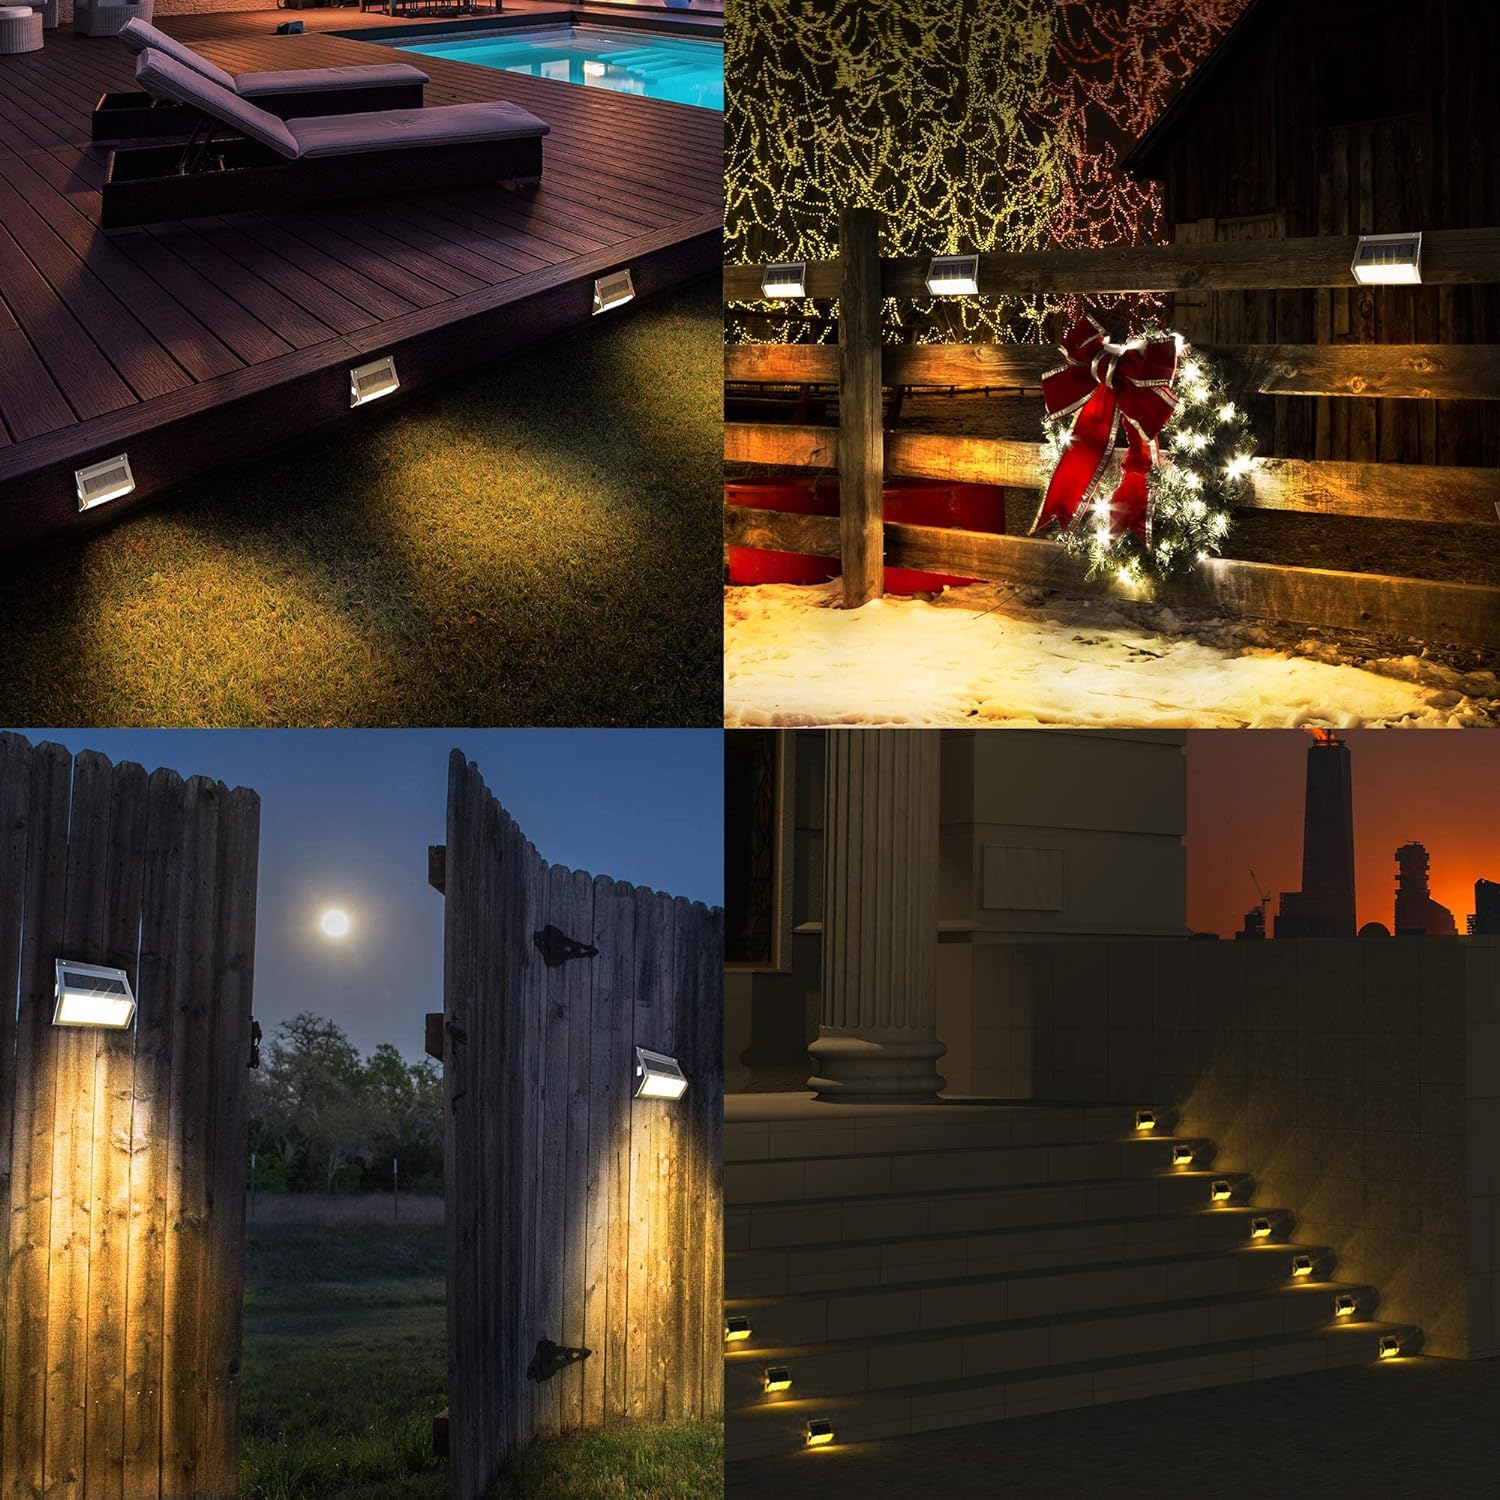 Solar Deck Lights Outdoor Landscape Yard,Garden GEEKHOM Solar Step Lights Waterproof LED Solar Fence Lights for Patio Stairs 8 Pack Pathway,Porch,Driveway Warm White/Color Changing Lighting